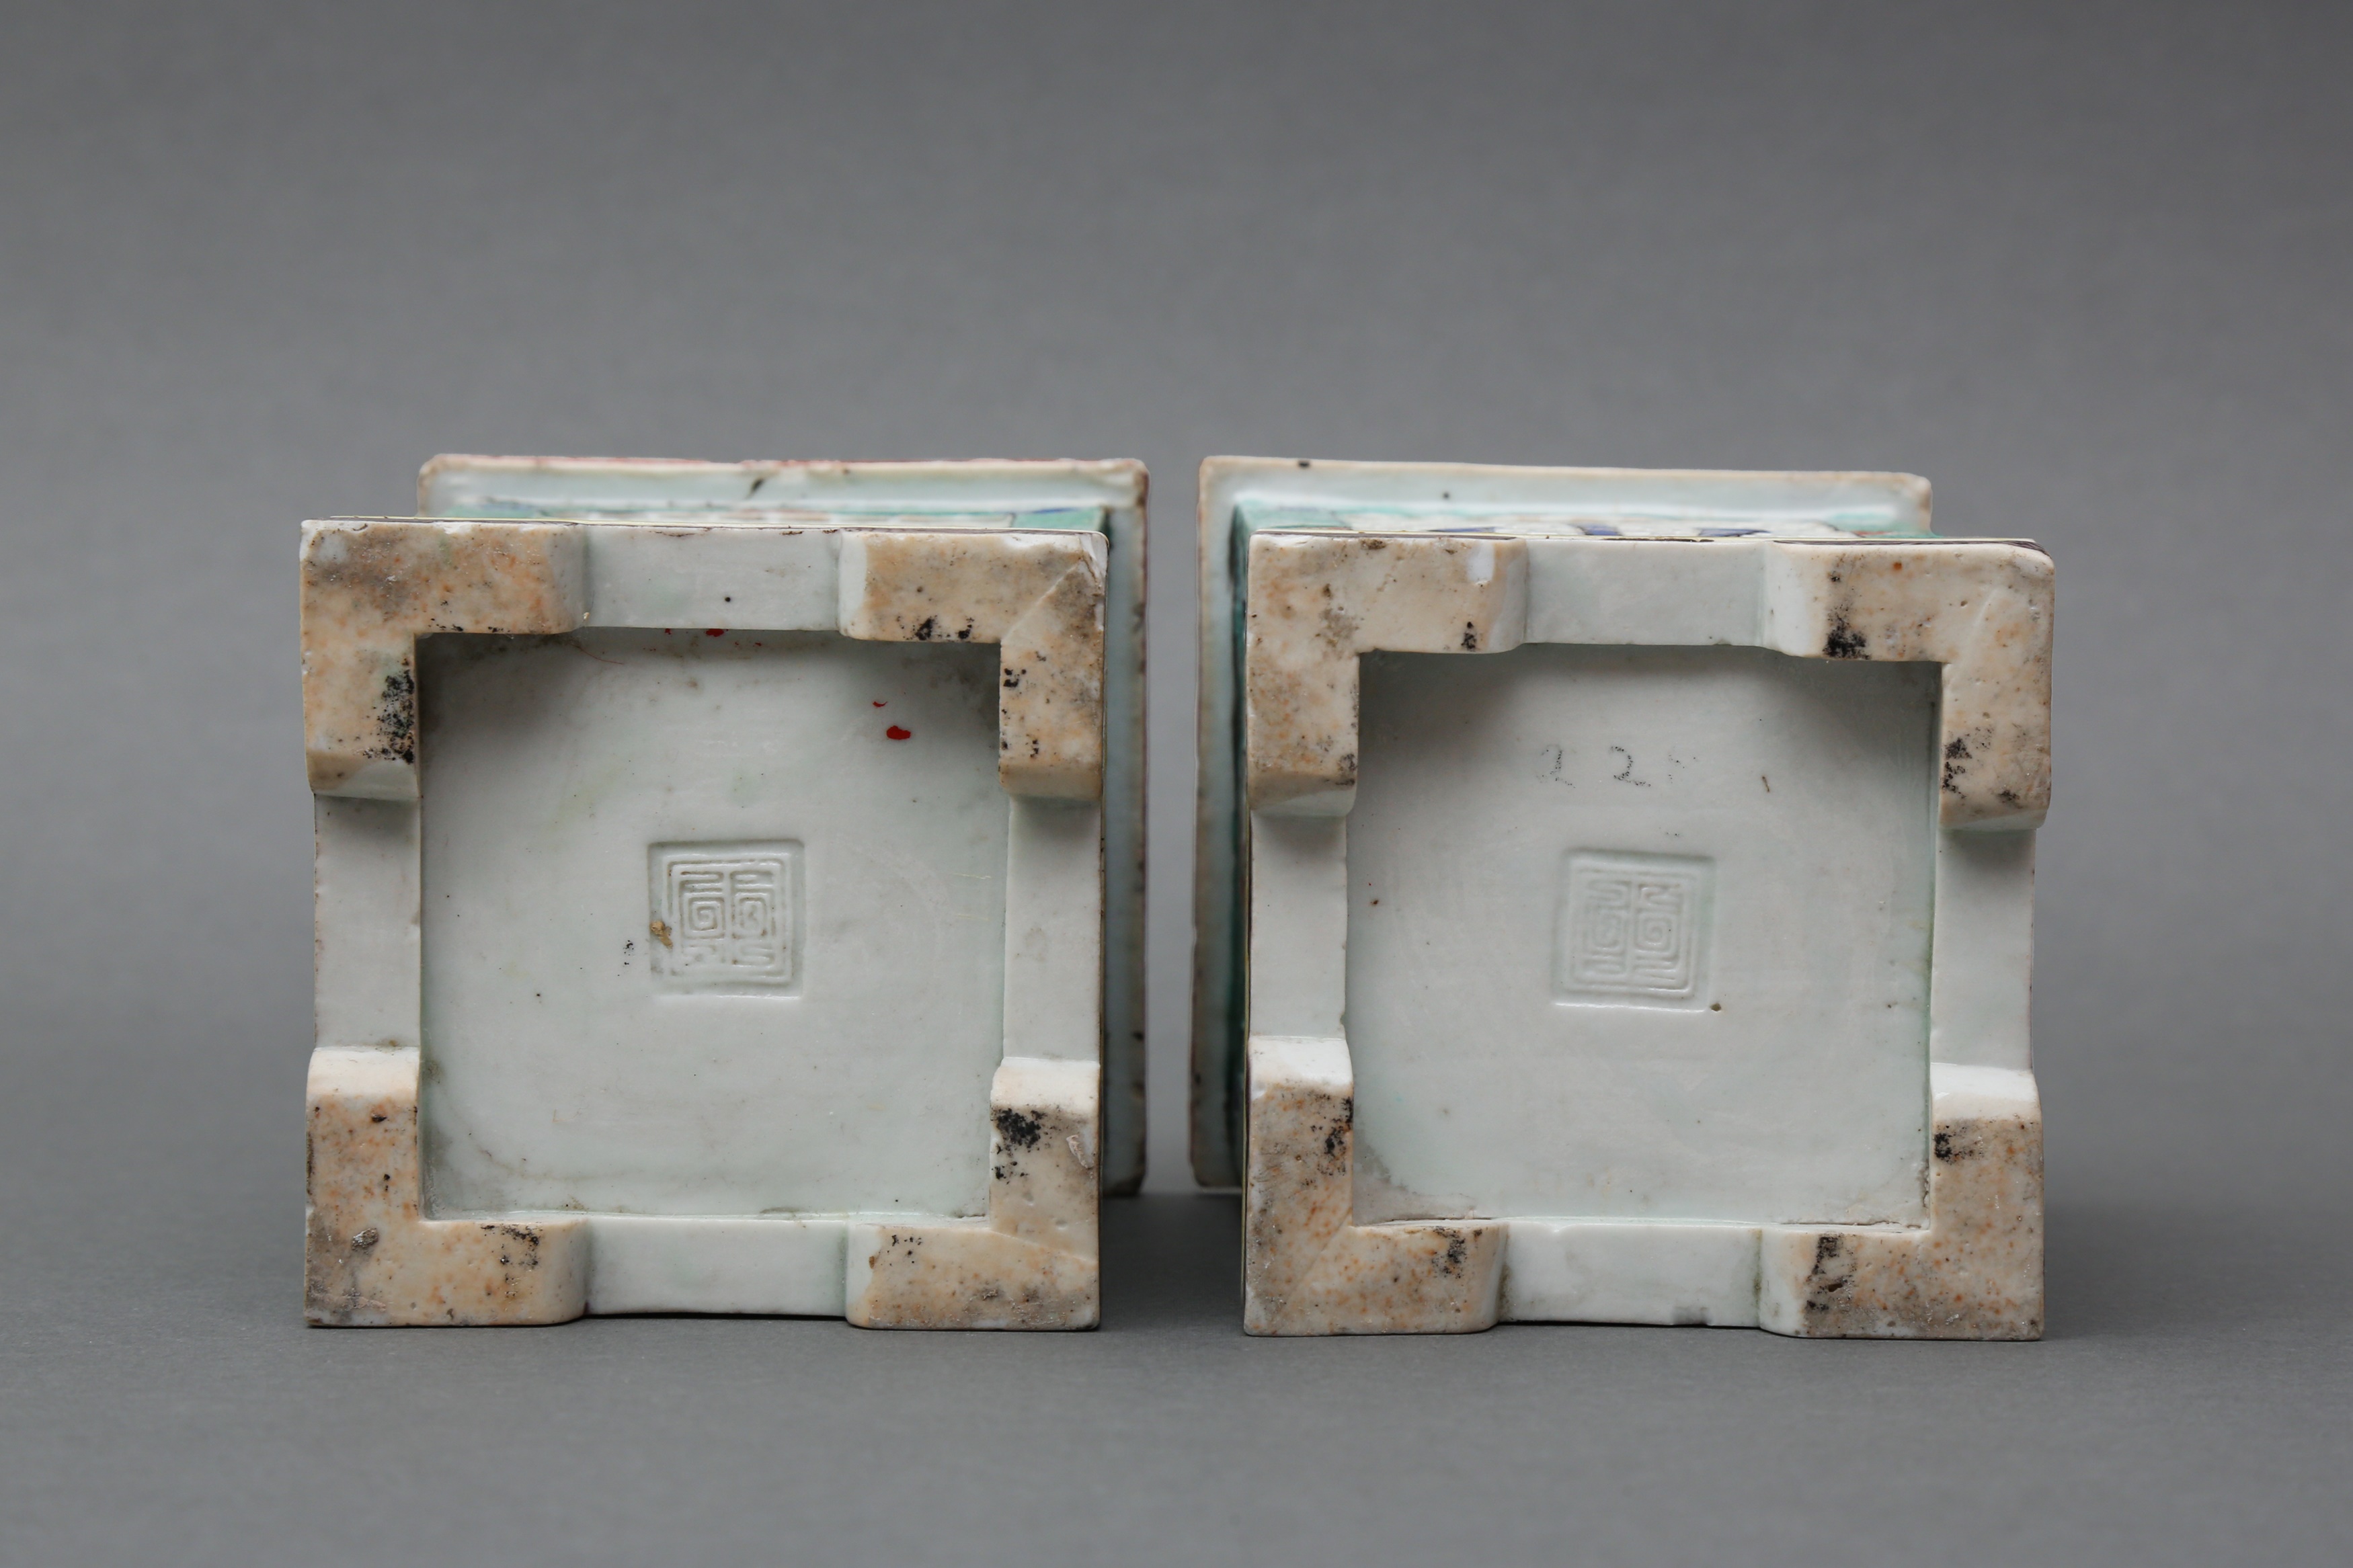 A PAIR OF RARE CHINESE FAMILLE-VERTE BISCUIT OPENWORK BRUSHPOTS, BITONG 清康熙 蘇三彩文章三斗方筆筒一對 - Image 3 of 21